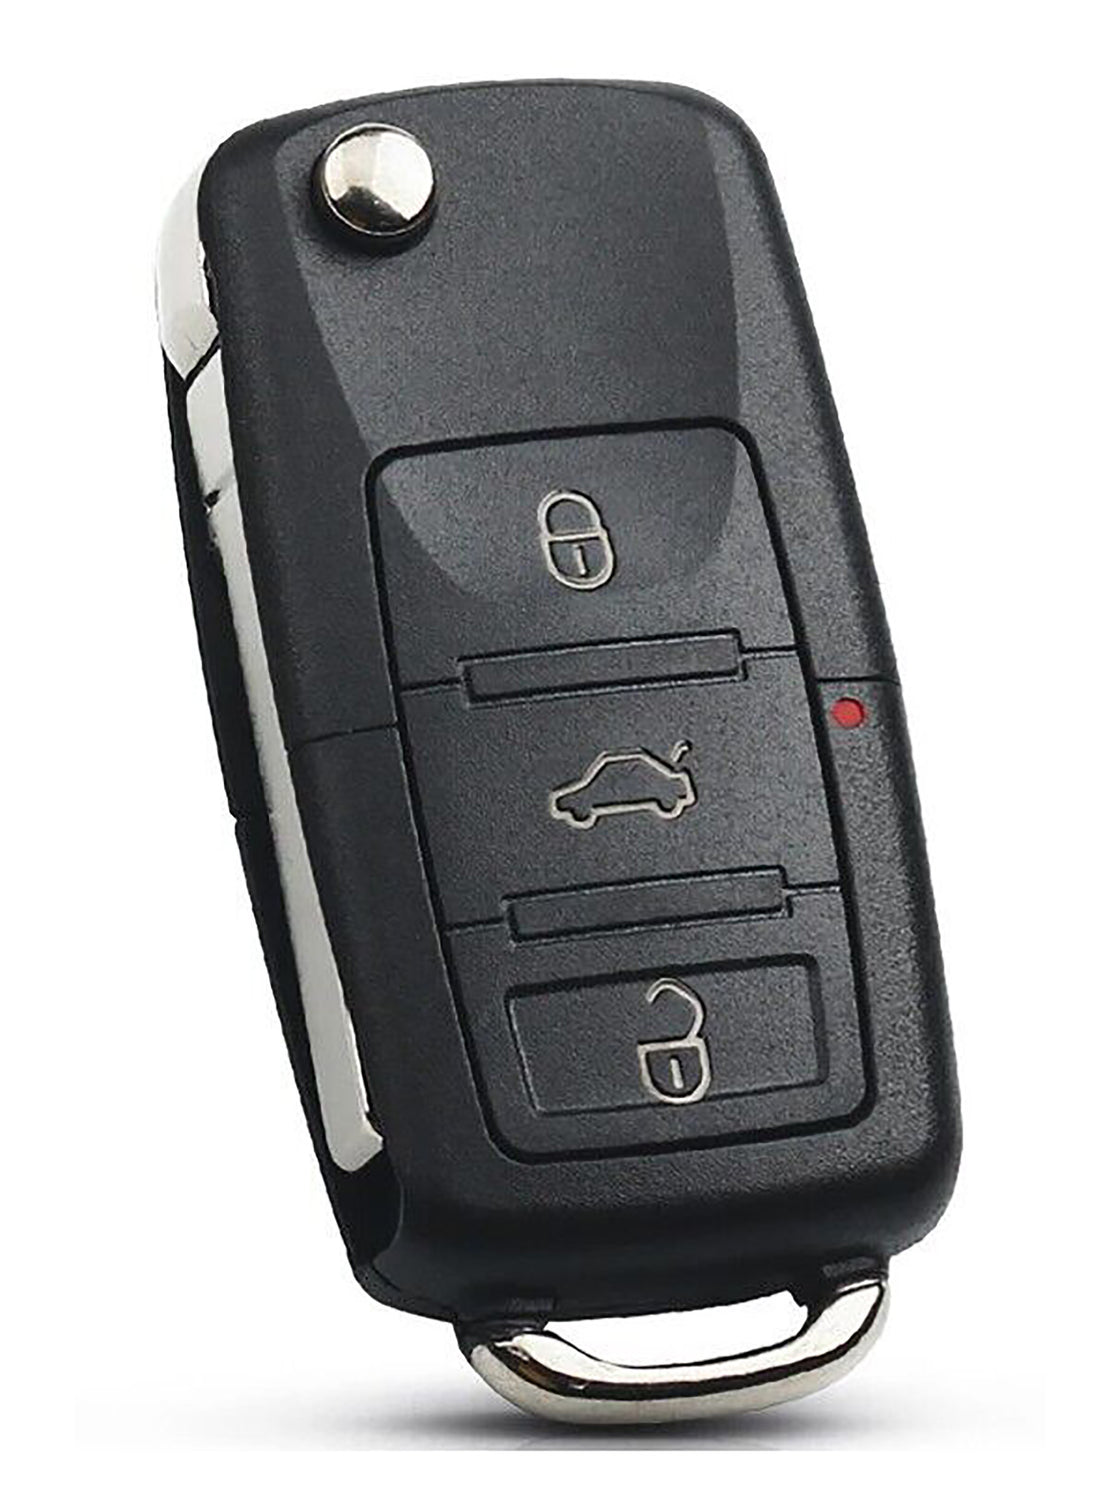 1x New Quality Replacement Key Fob Remote Compatible with & Fit For Volkswagen VW Vehicles - MPN NBG92596263-02